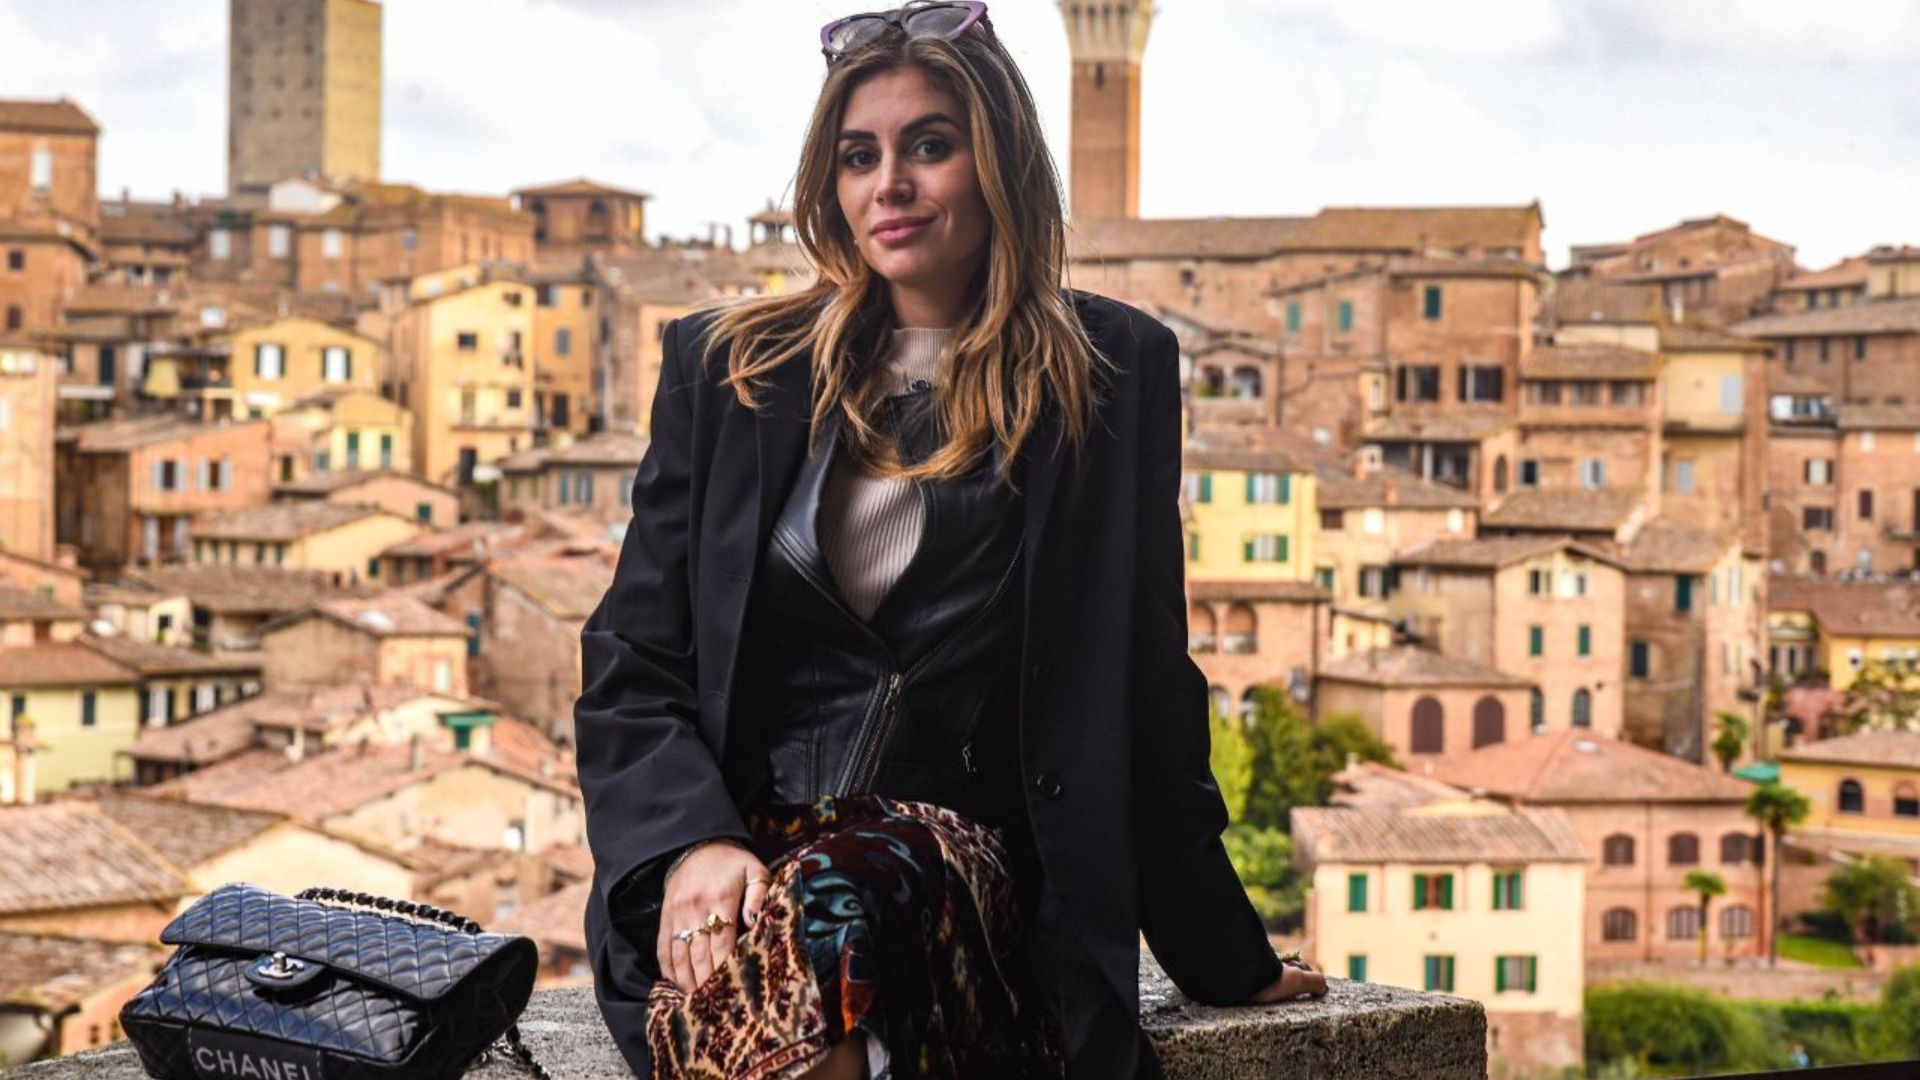 Discover the beauties of Siena and immortalize your memories with a professional photoshoot